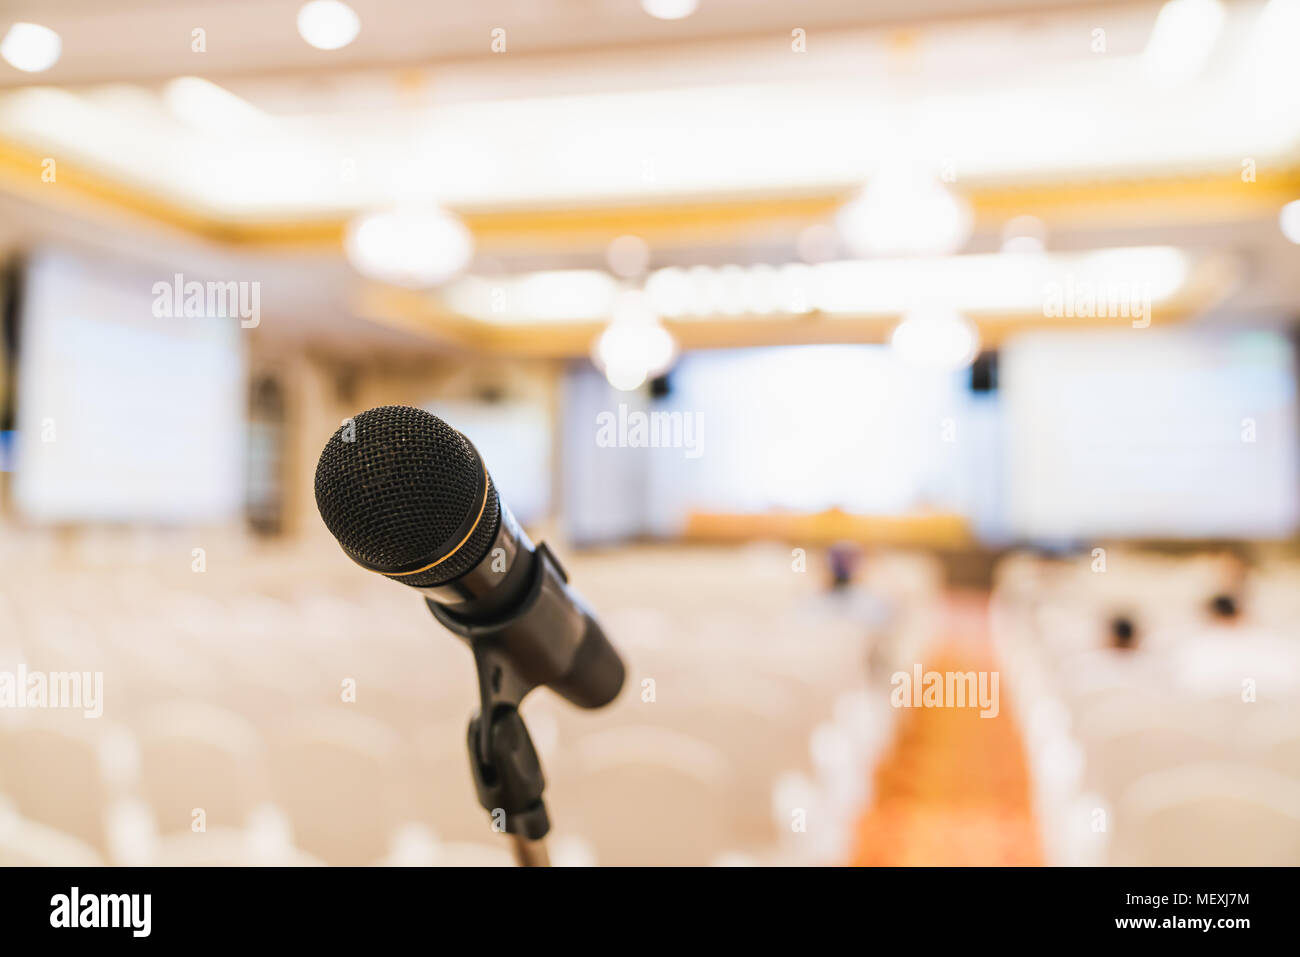 Microphone stand in conference hall blurred background with copy space. Public announcement event, Organization company meeting, live performance Stock Photo